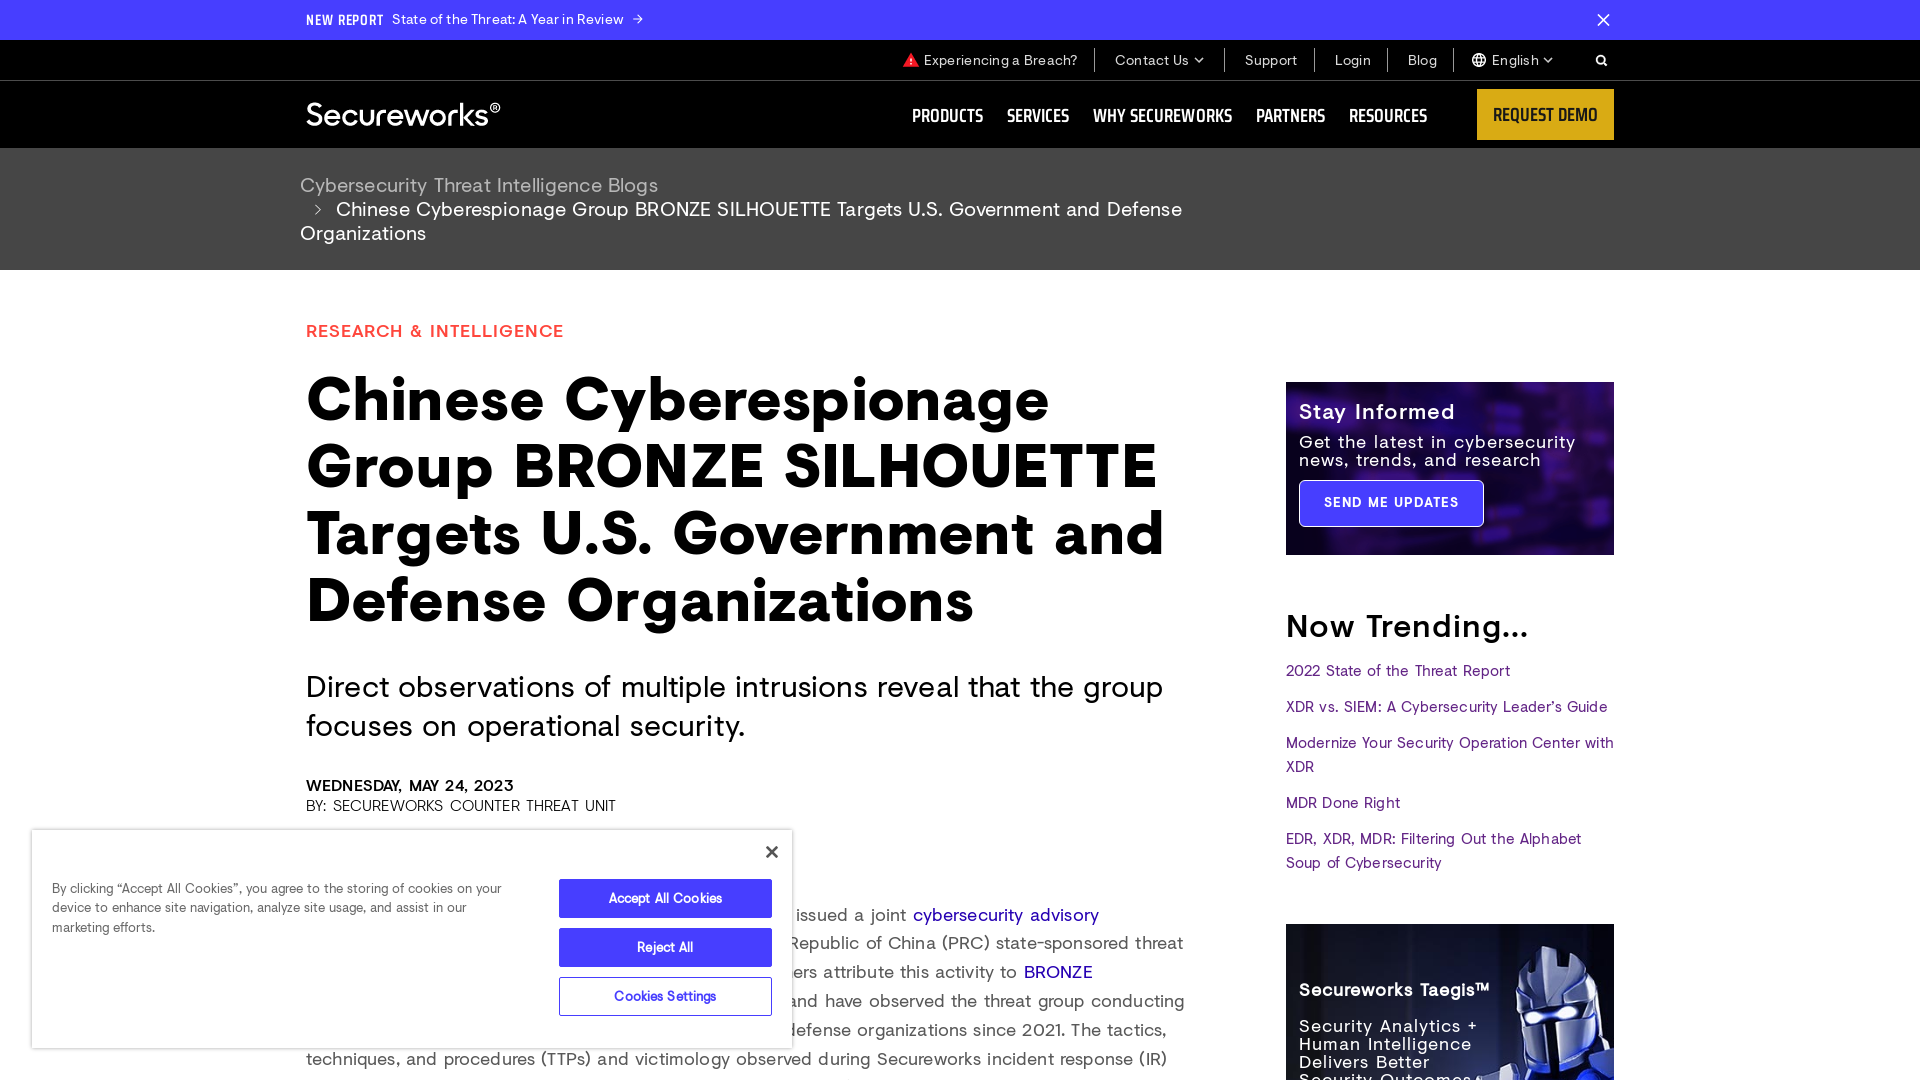 Chinese Cyberespionage Group BRONZE SILHOUETTE Targets U.S. Government and Defense Organizations | Secureworks